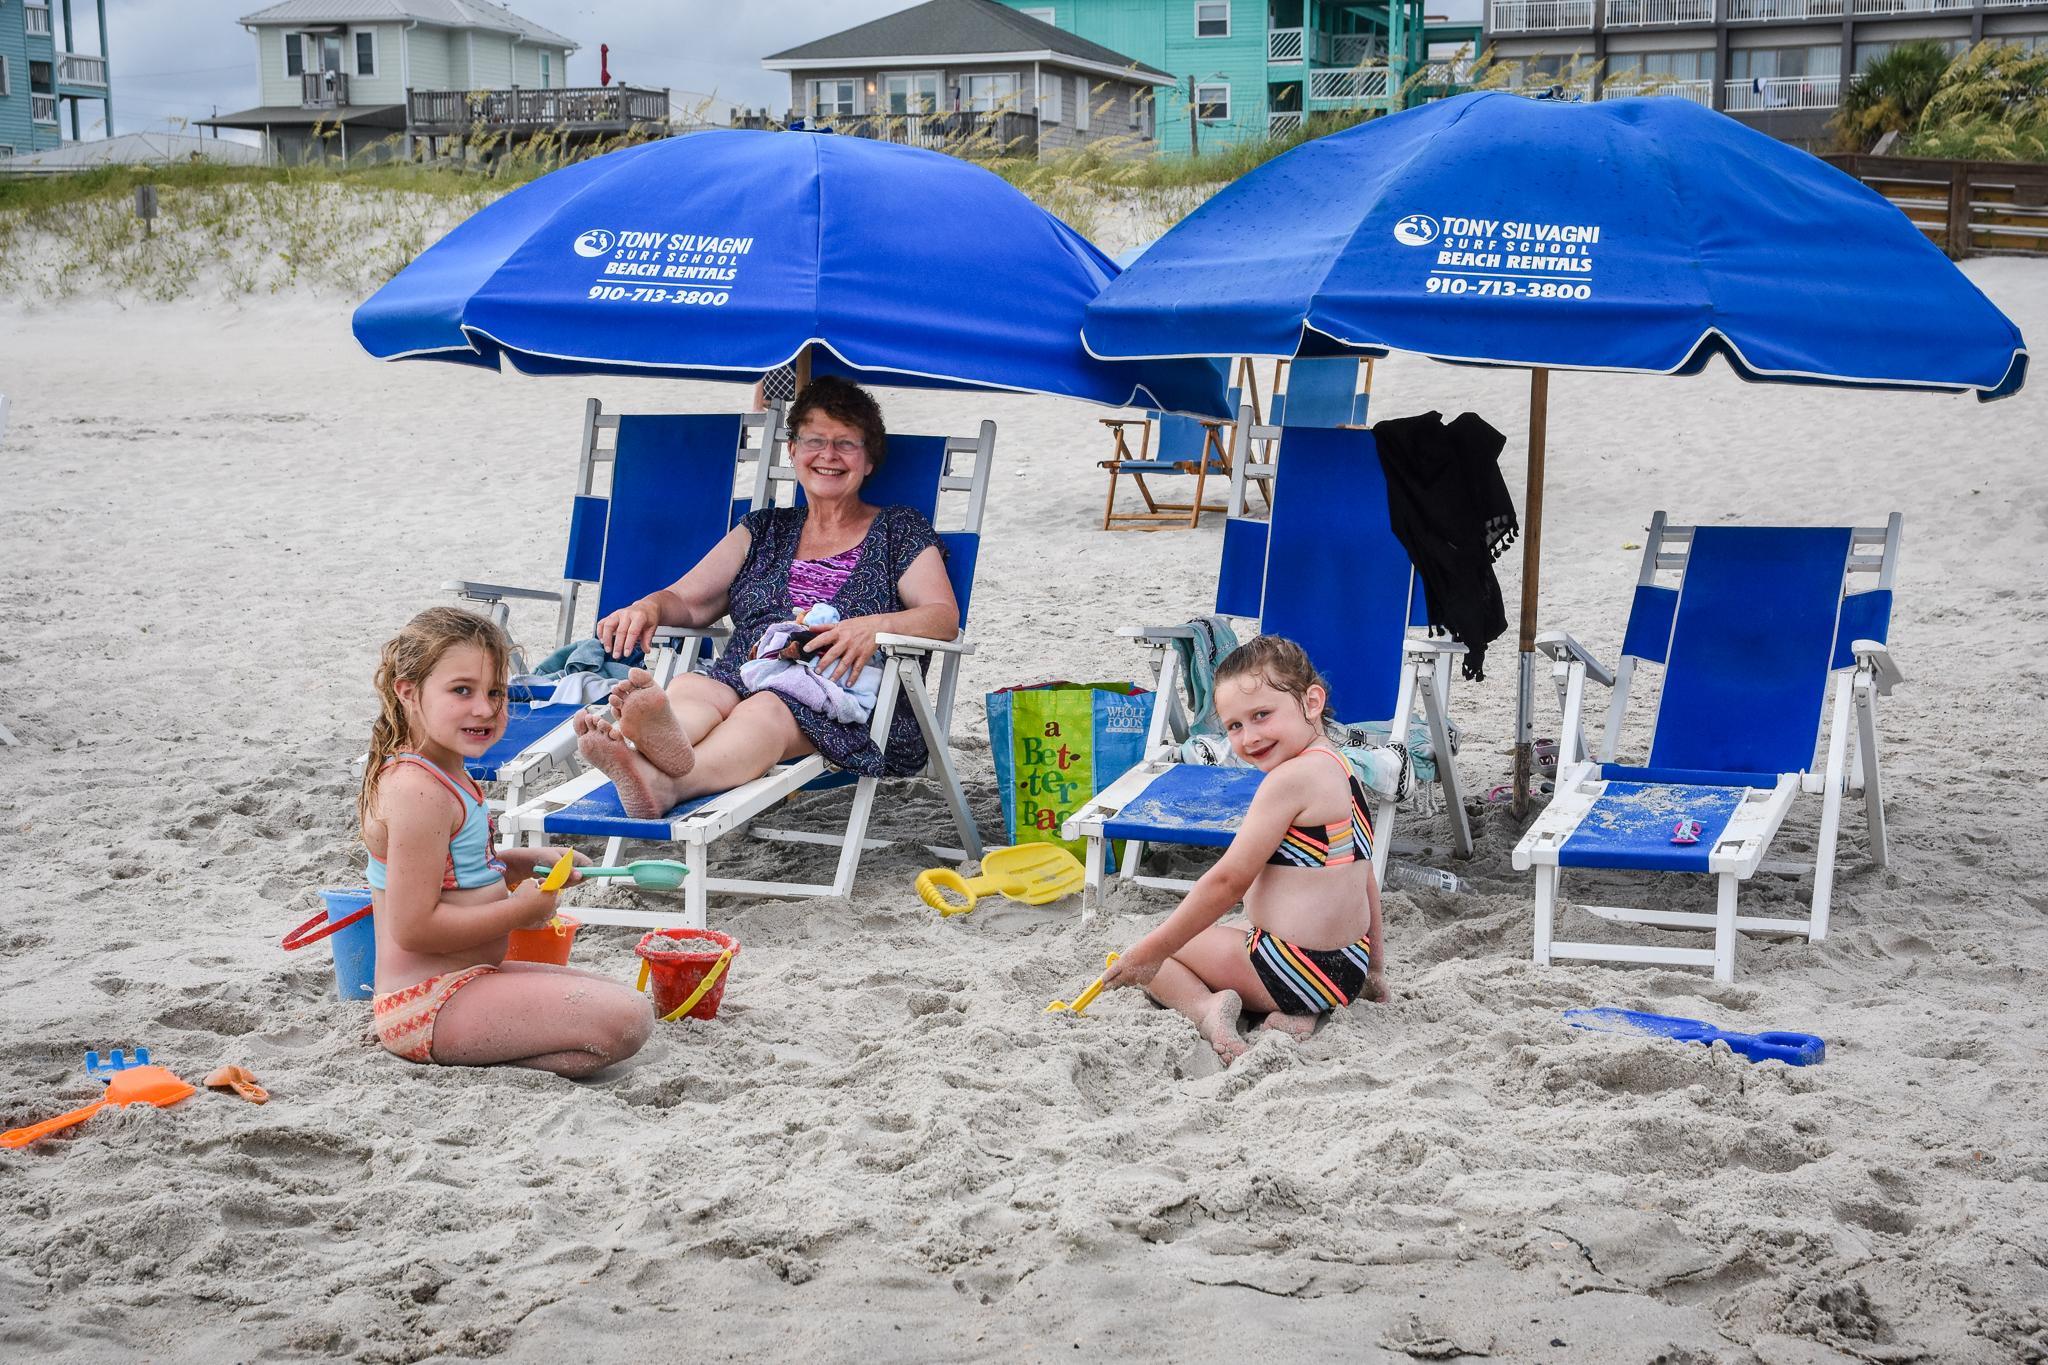 Smiling family at the beach with rented beach chairs and umbrellas